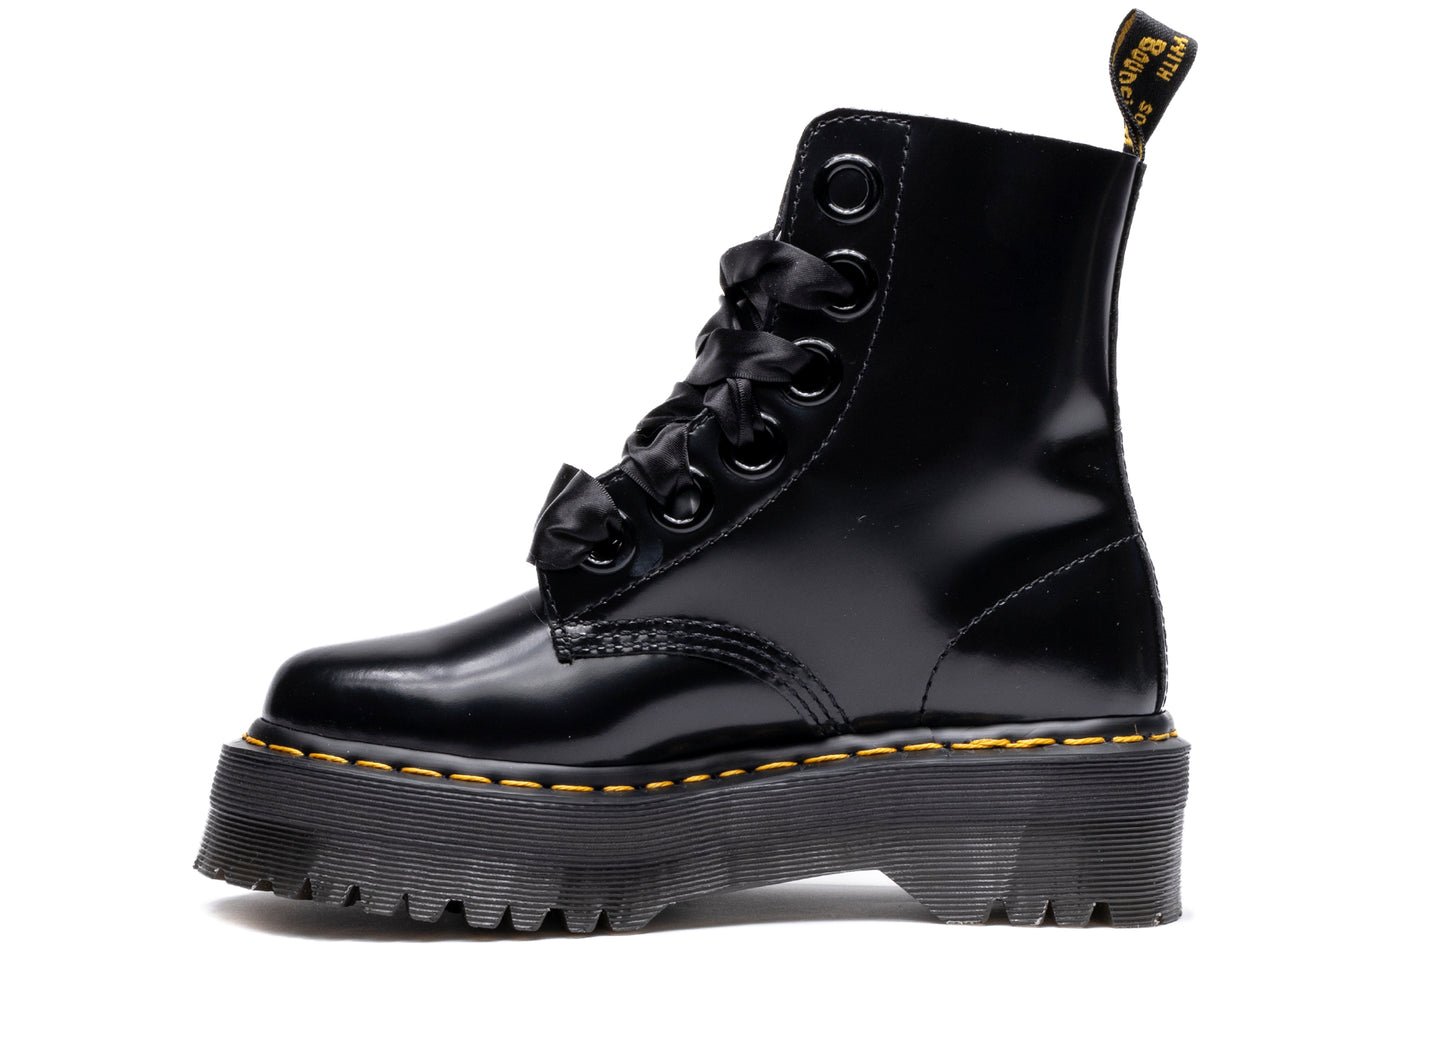 Women's Dr. Martens Molly Leather Platform Boots